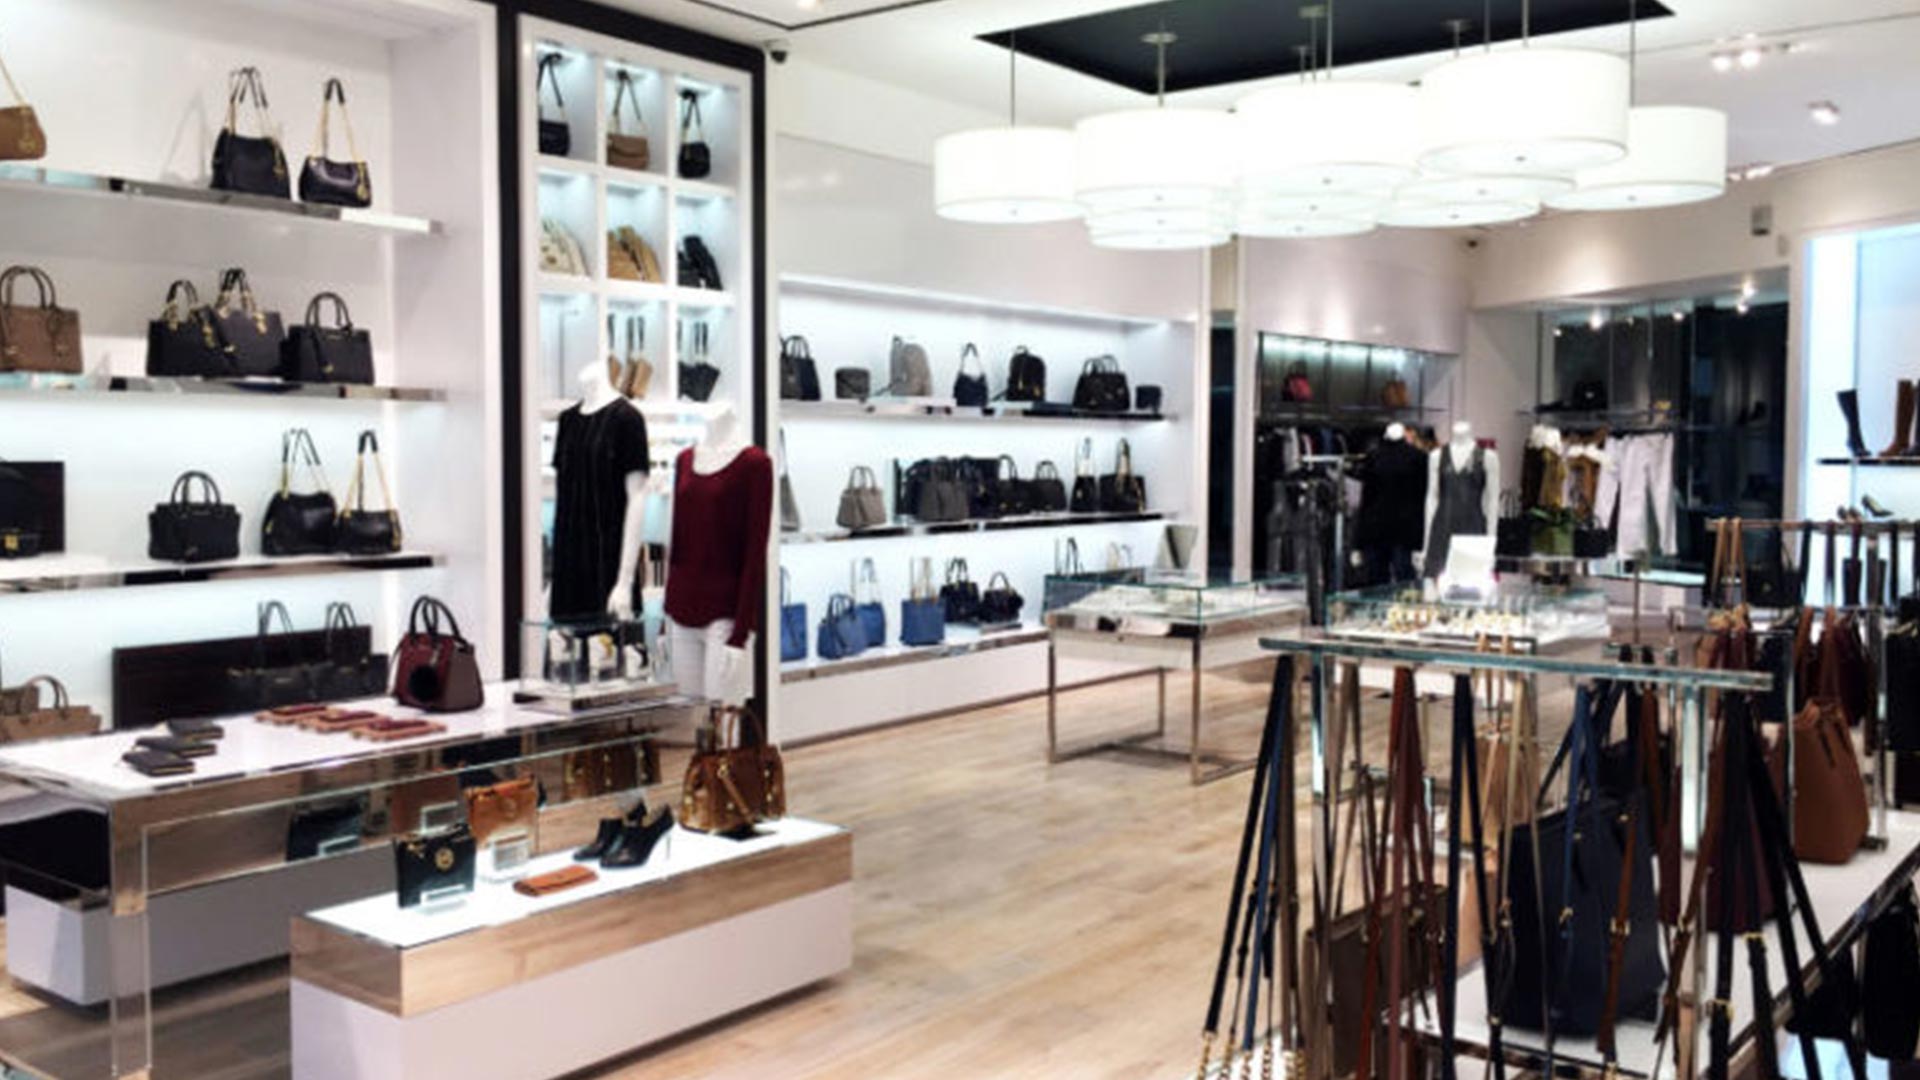 Project management and construction management for Michael Kors stores